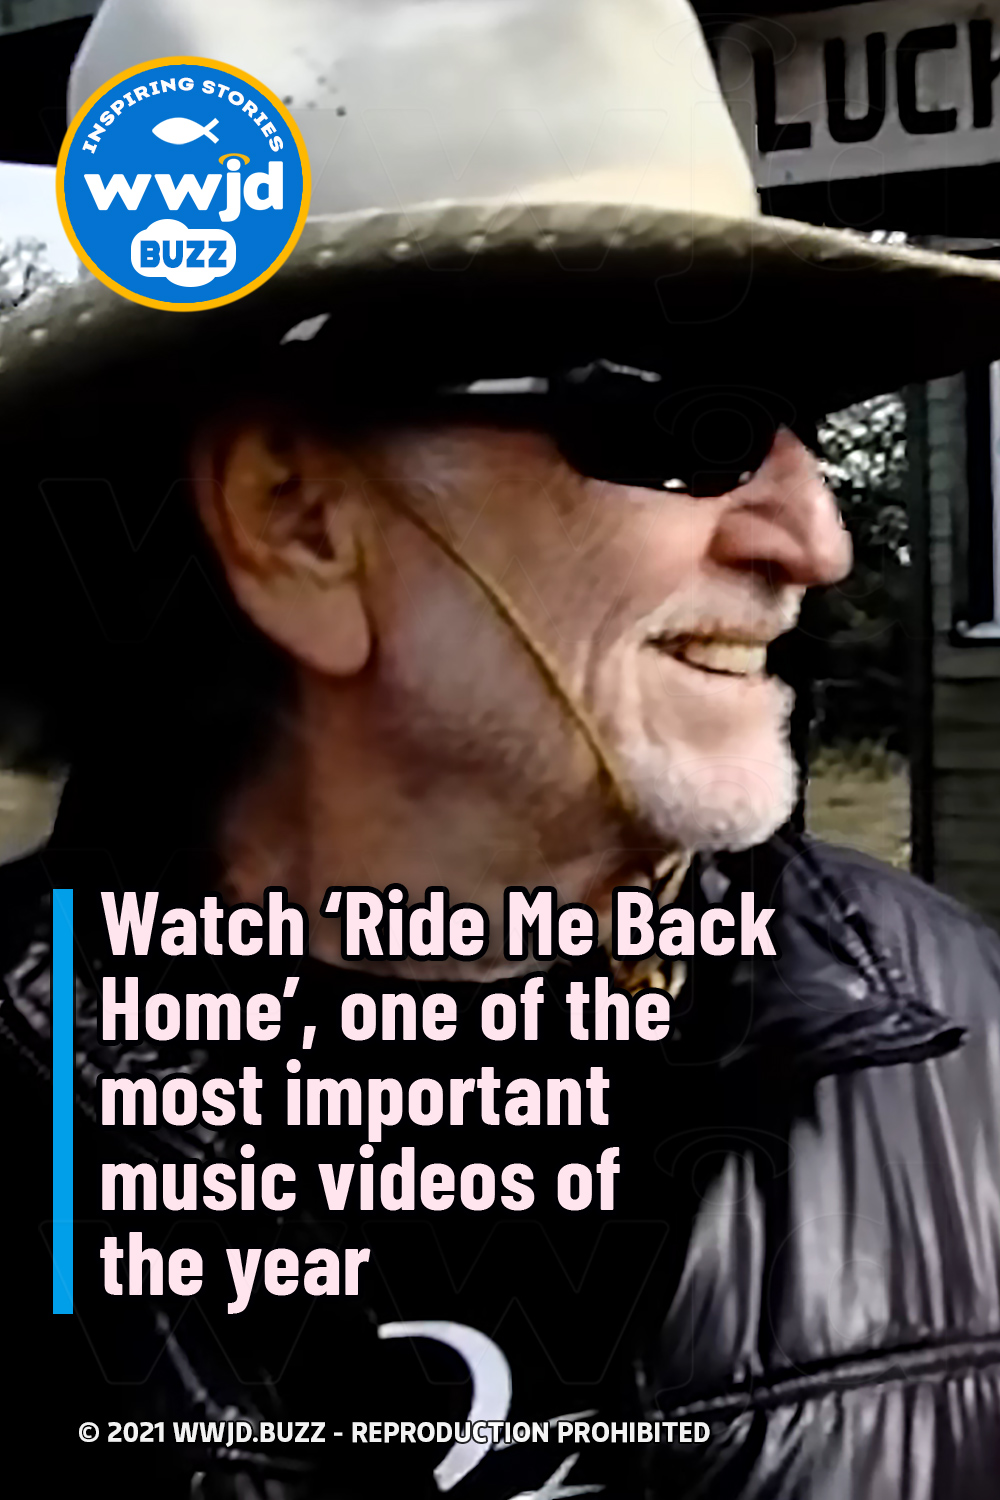 Watch ‘Ride Me Back Home’, one of the most important music videos of the year